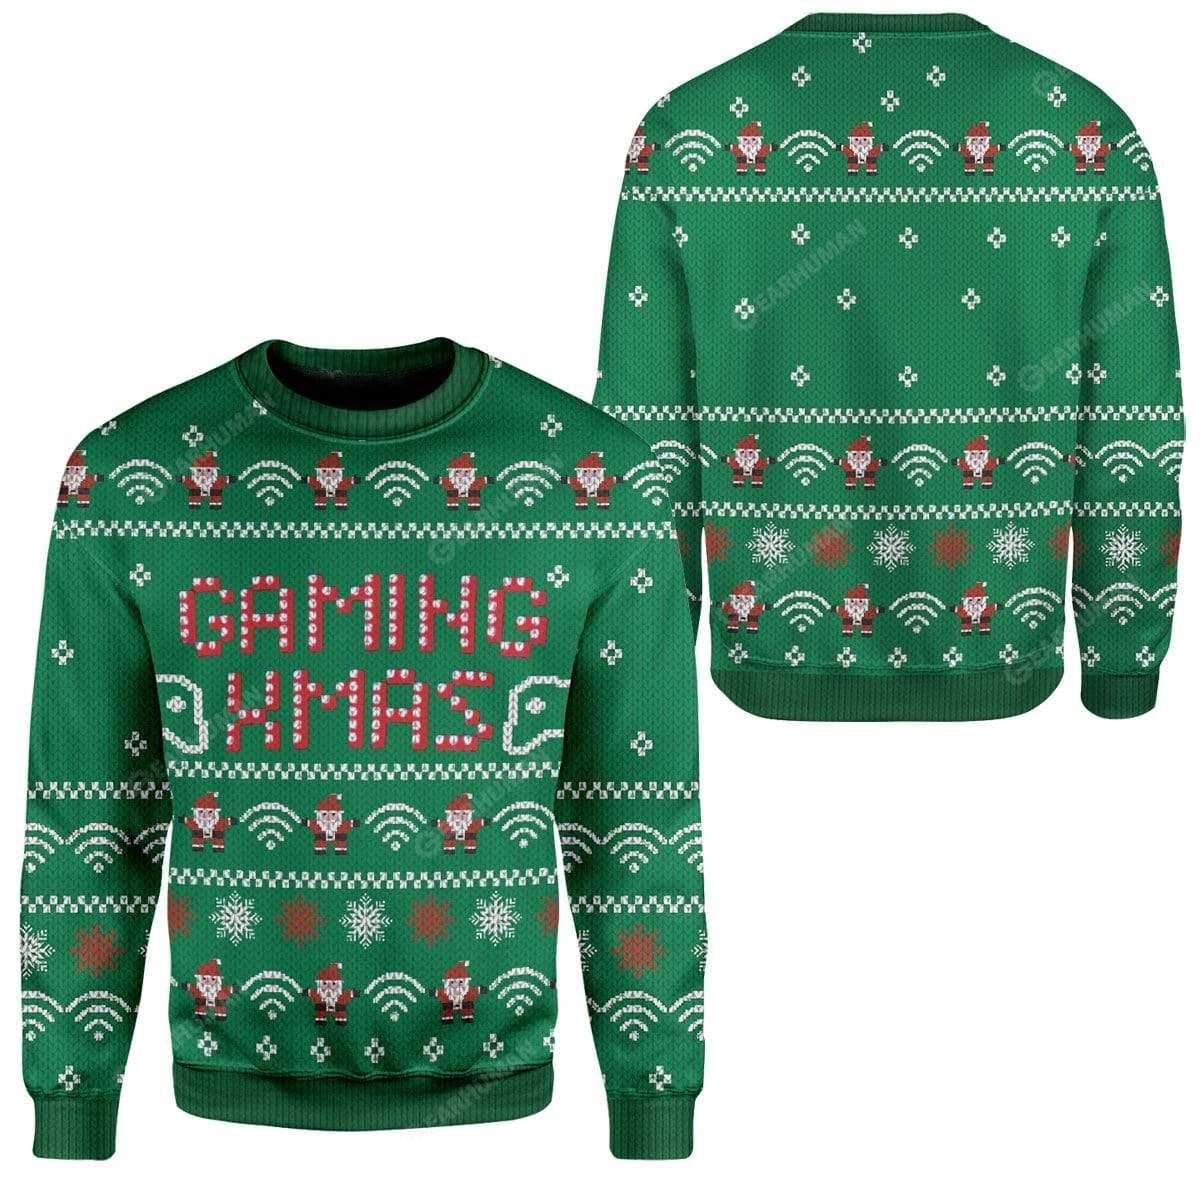 [ COOL ] Gaming Xmas ugly sweater – Saleoff 091221